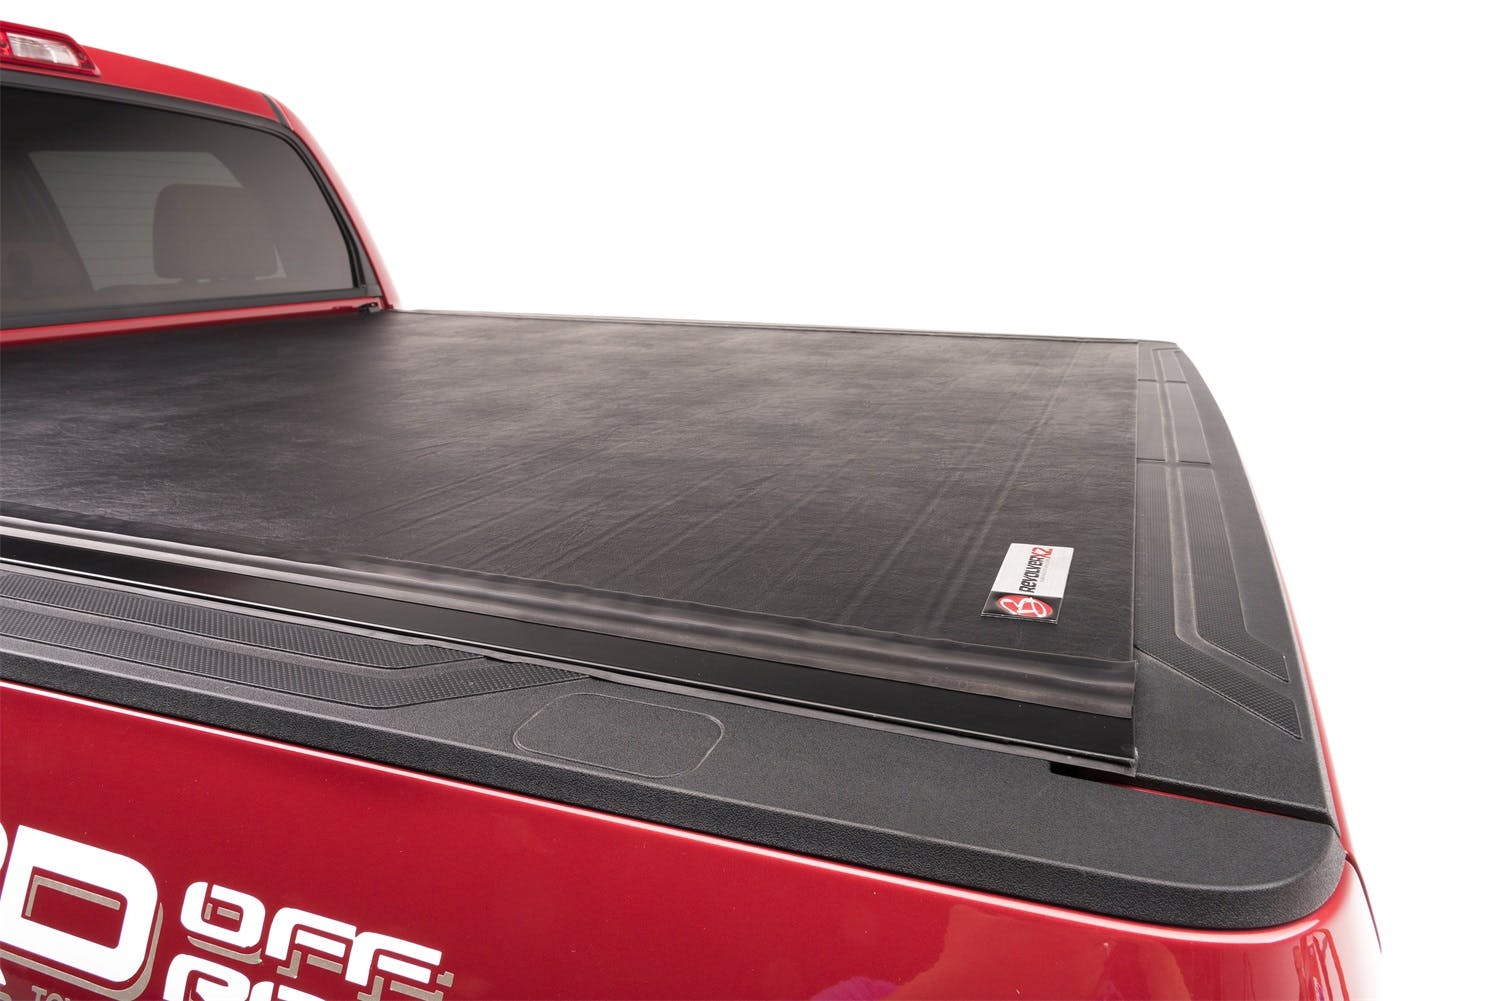 BAK Industries 39410 Revolver X2 Hard Rolling Truck Bed Cover